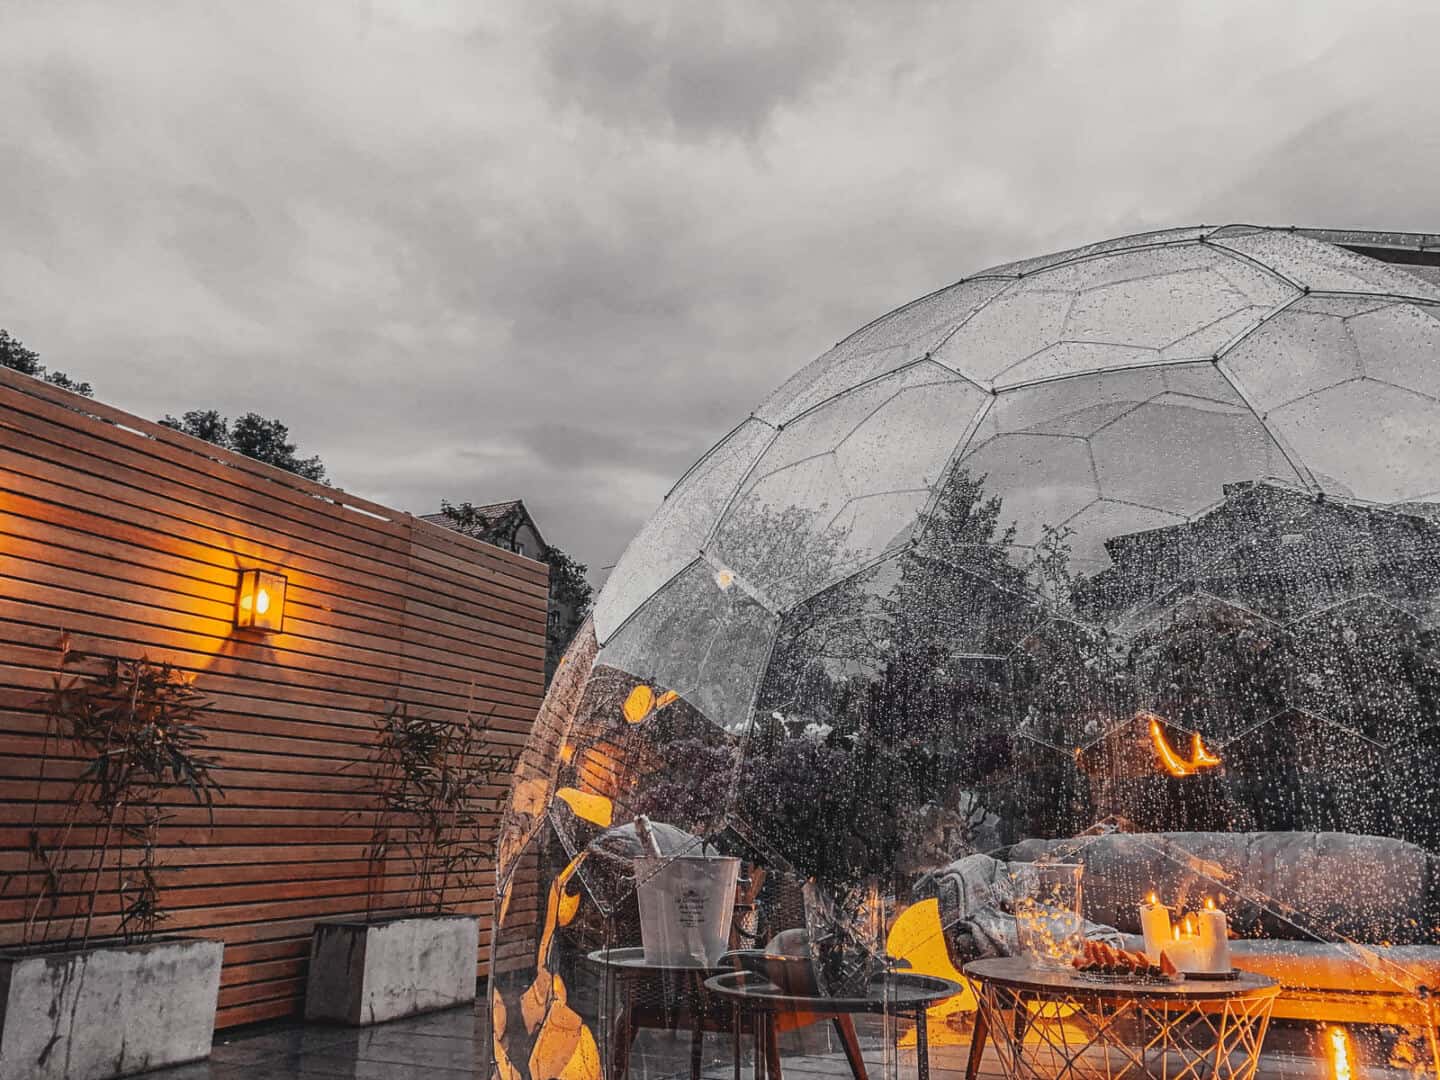 Garden furniture set up inside a garden dome which is covered in rain. Candles and a bottle of champagne create a romantic atmosphere